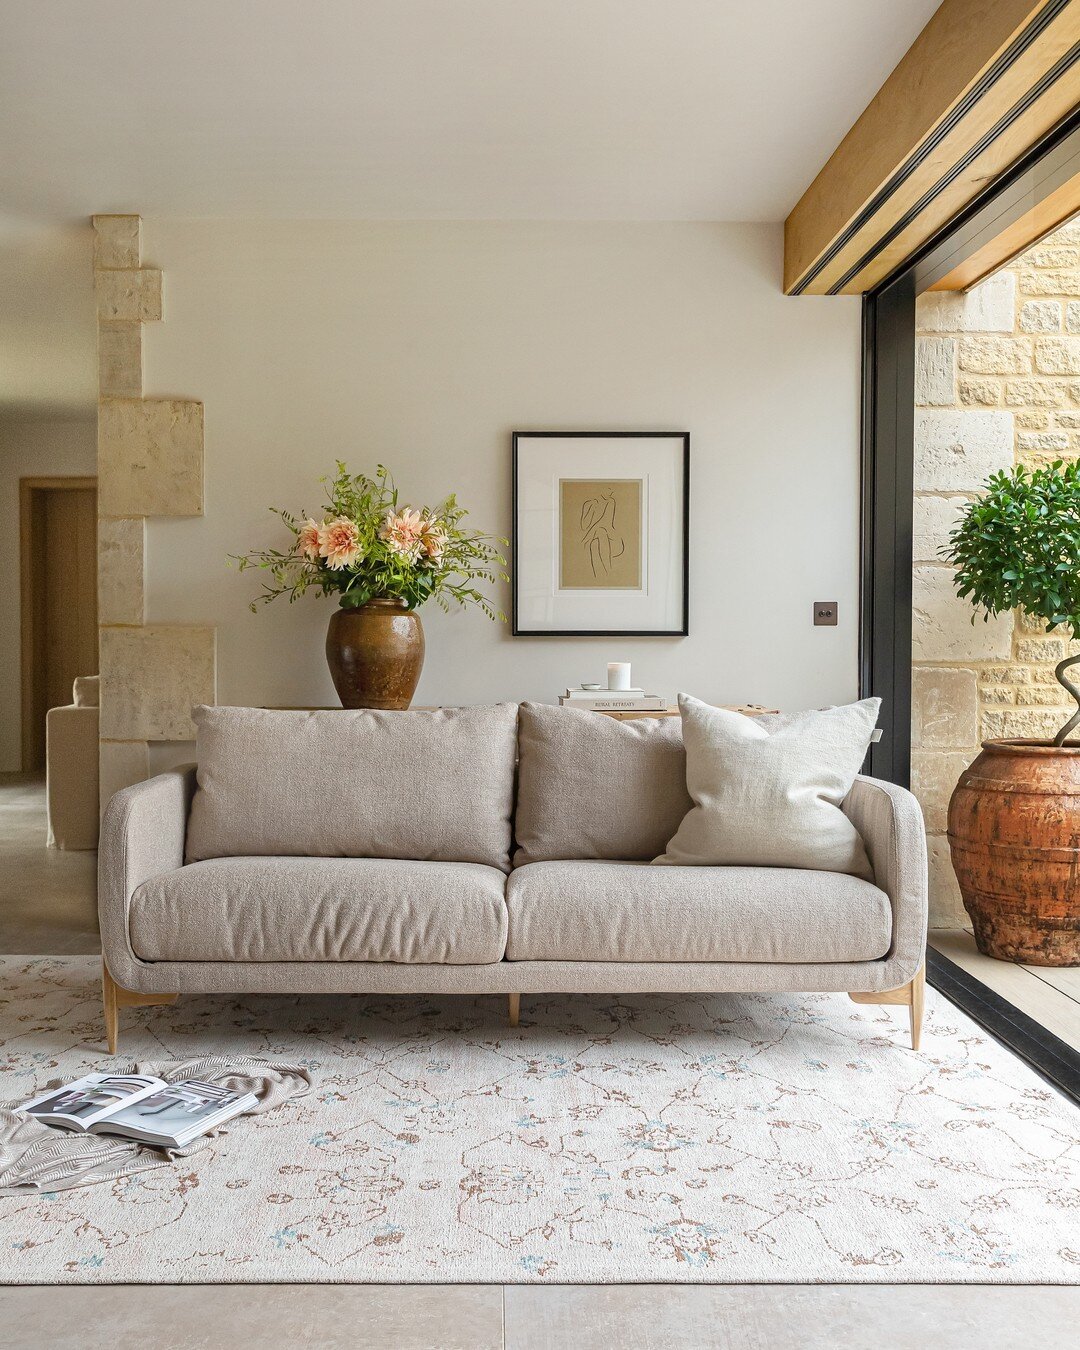 Make the most of 20% off our Springhill sofa in our SPRING SALE 🌼 Upholstered in a light woven fabric and finished with elegant solid oak legs, this sofa is all you need to create an irresistibly fresh space this season.​​​​​​​​​.
.
. 
#cotswoldgrey